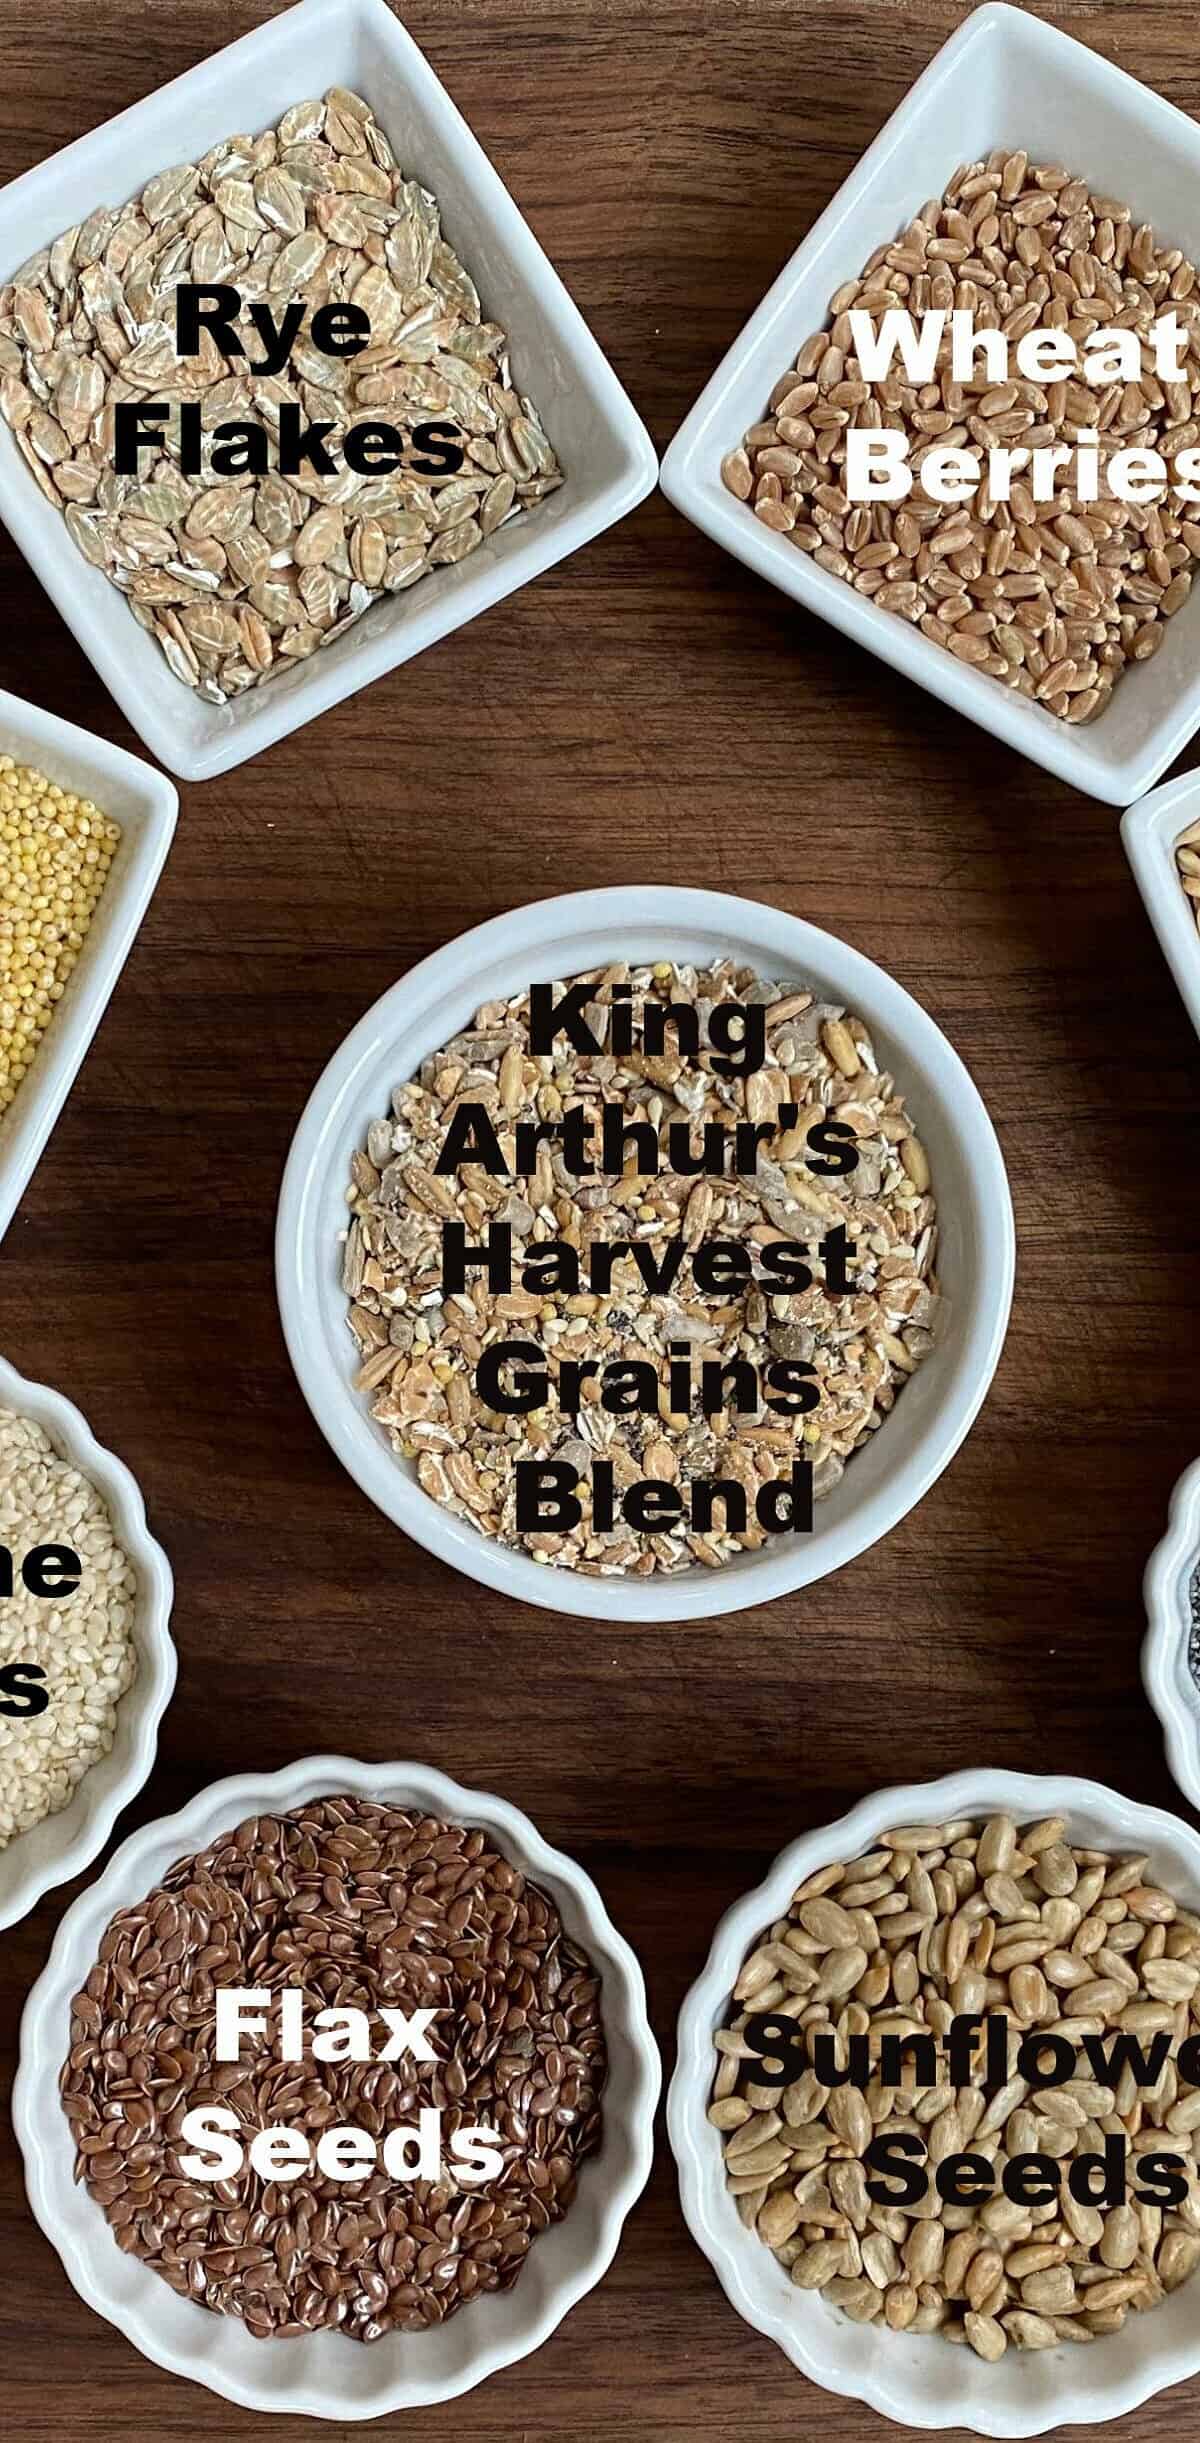  Give your bread a little something extra with this grain blend